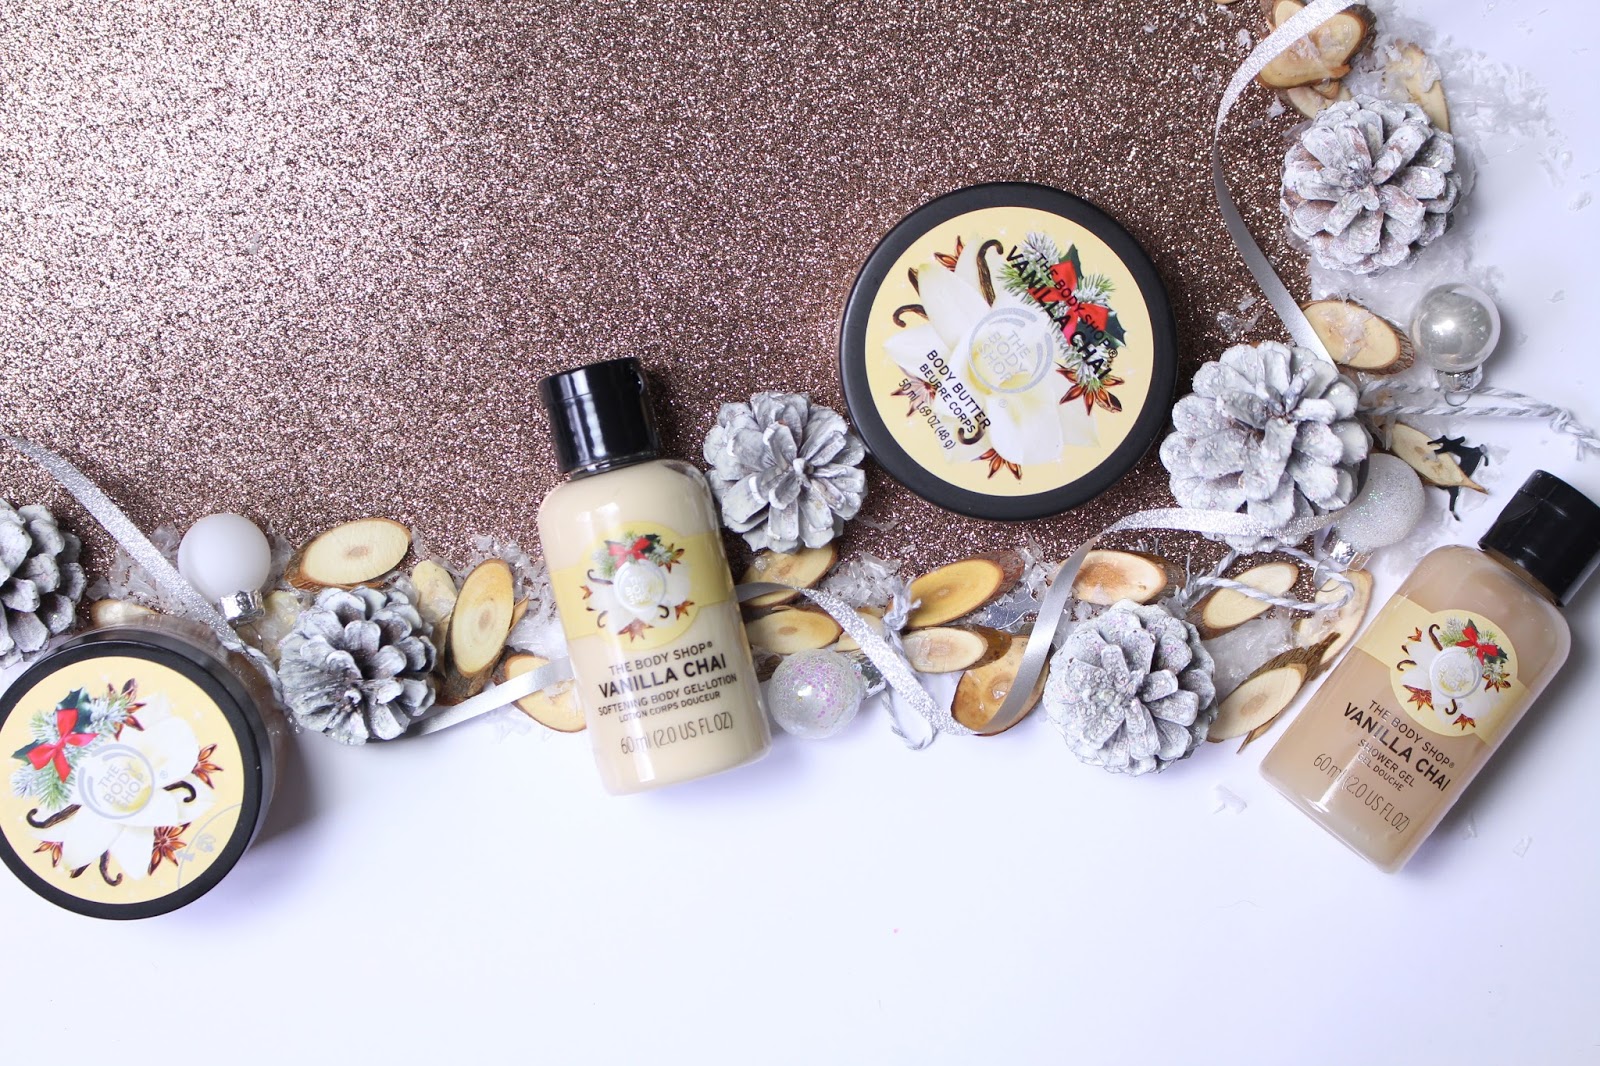 The Body Shop Christmas Collection